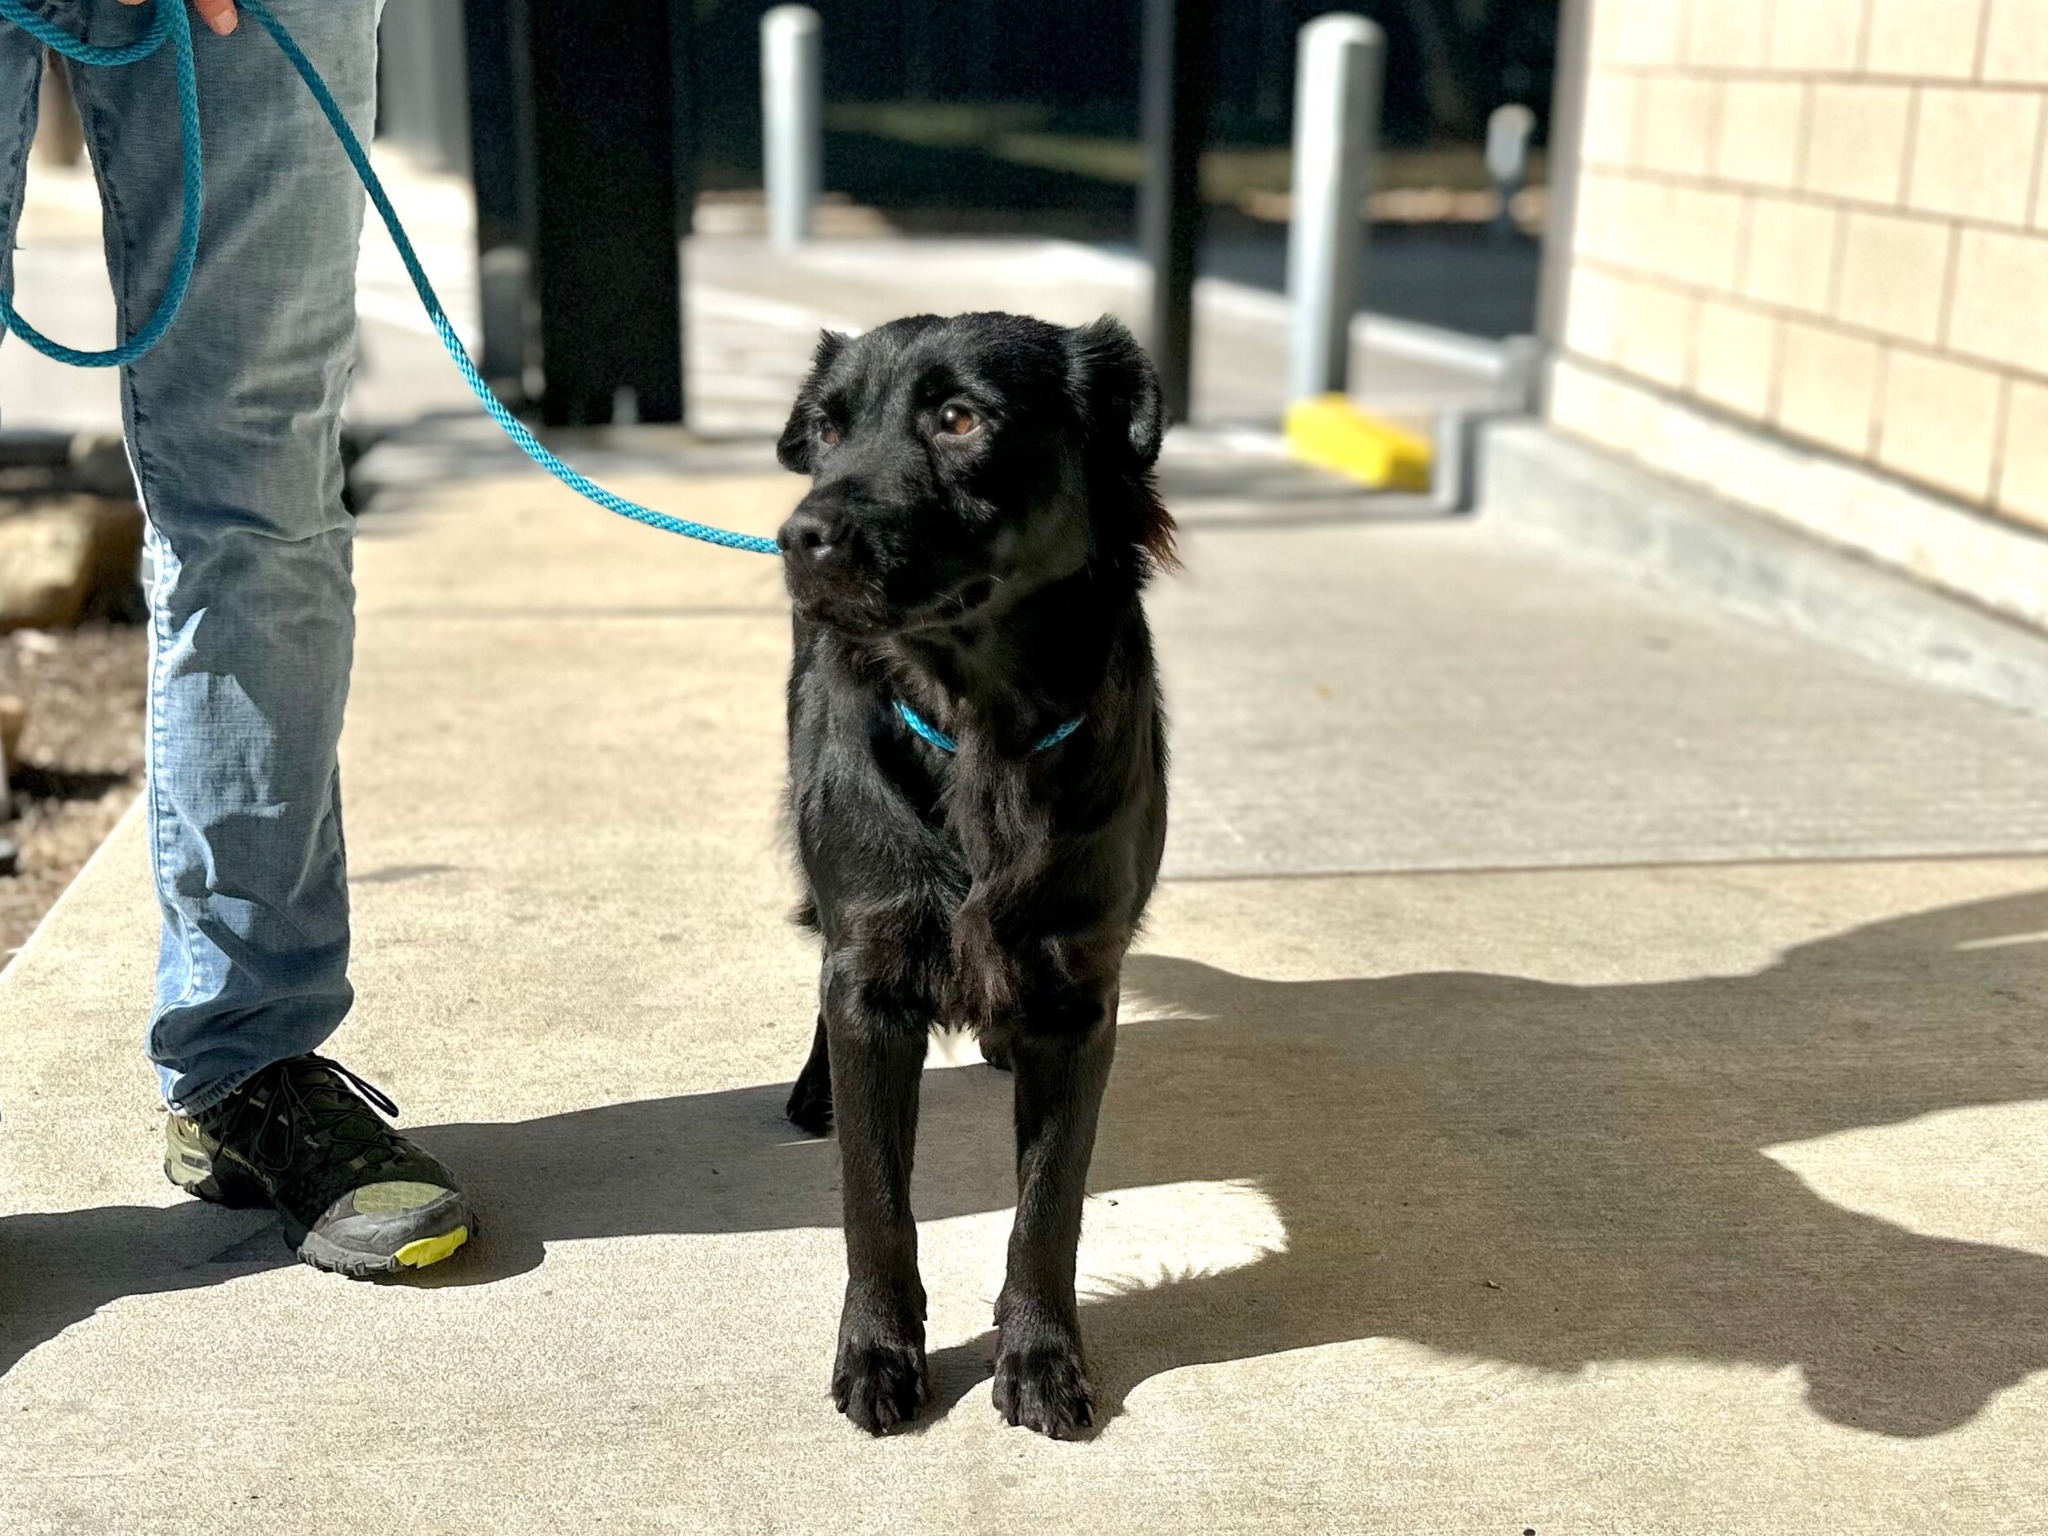 photo of the rescue dog on a leash